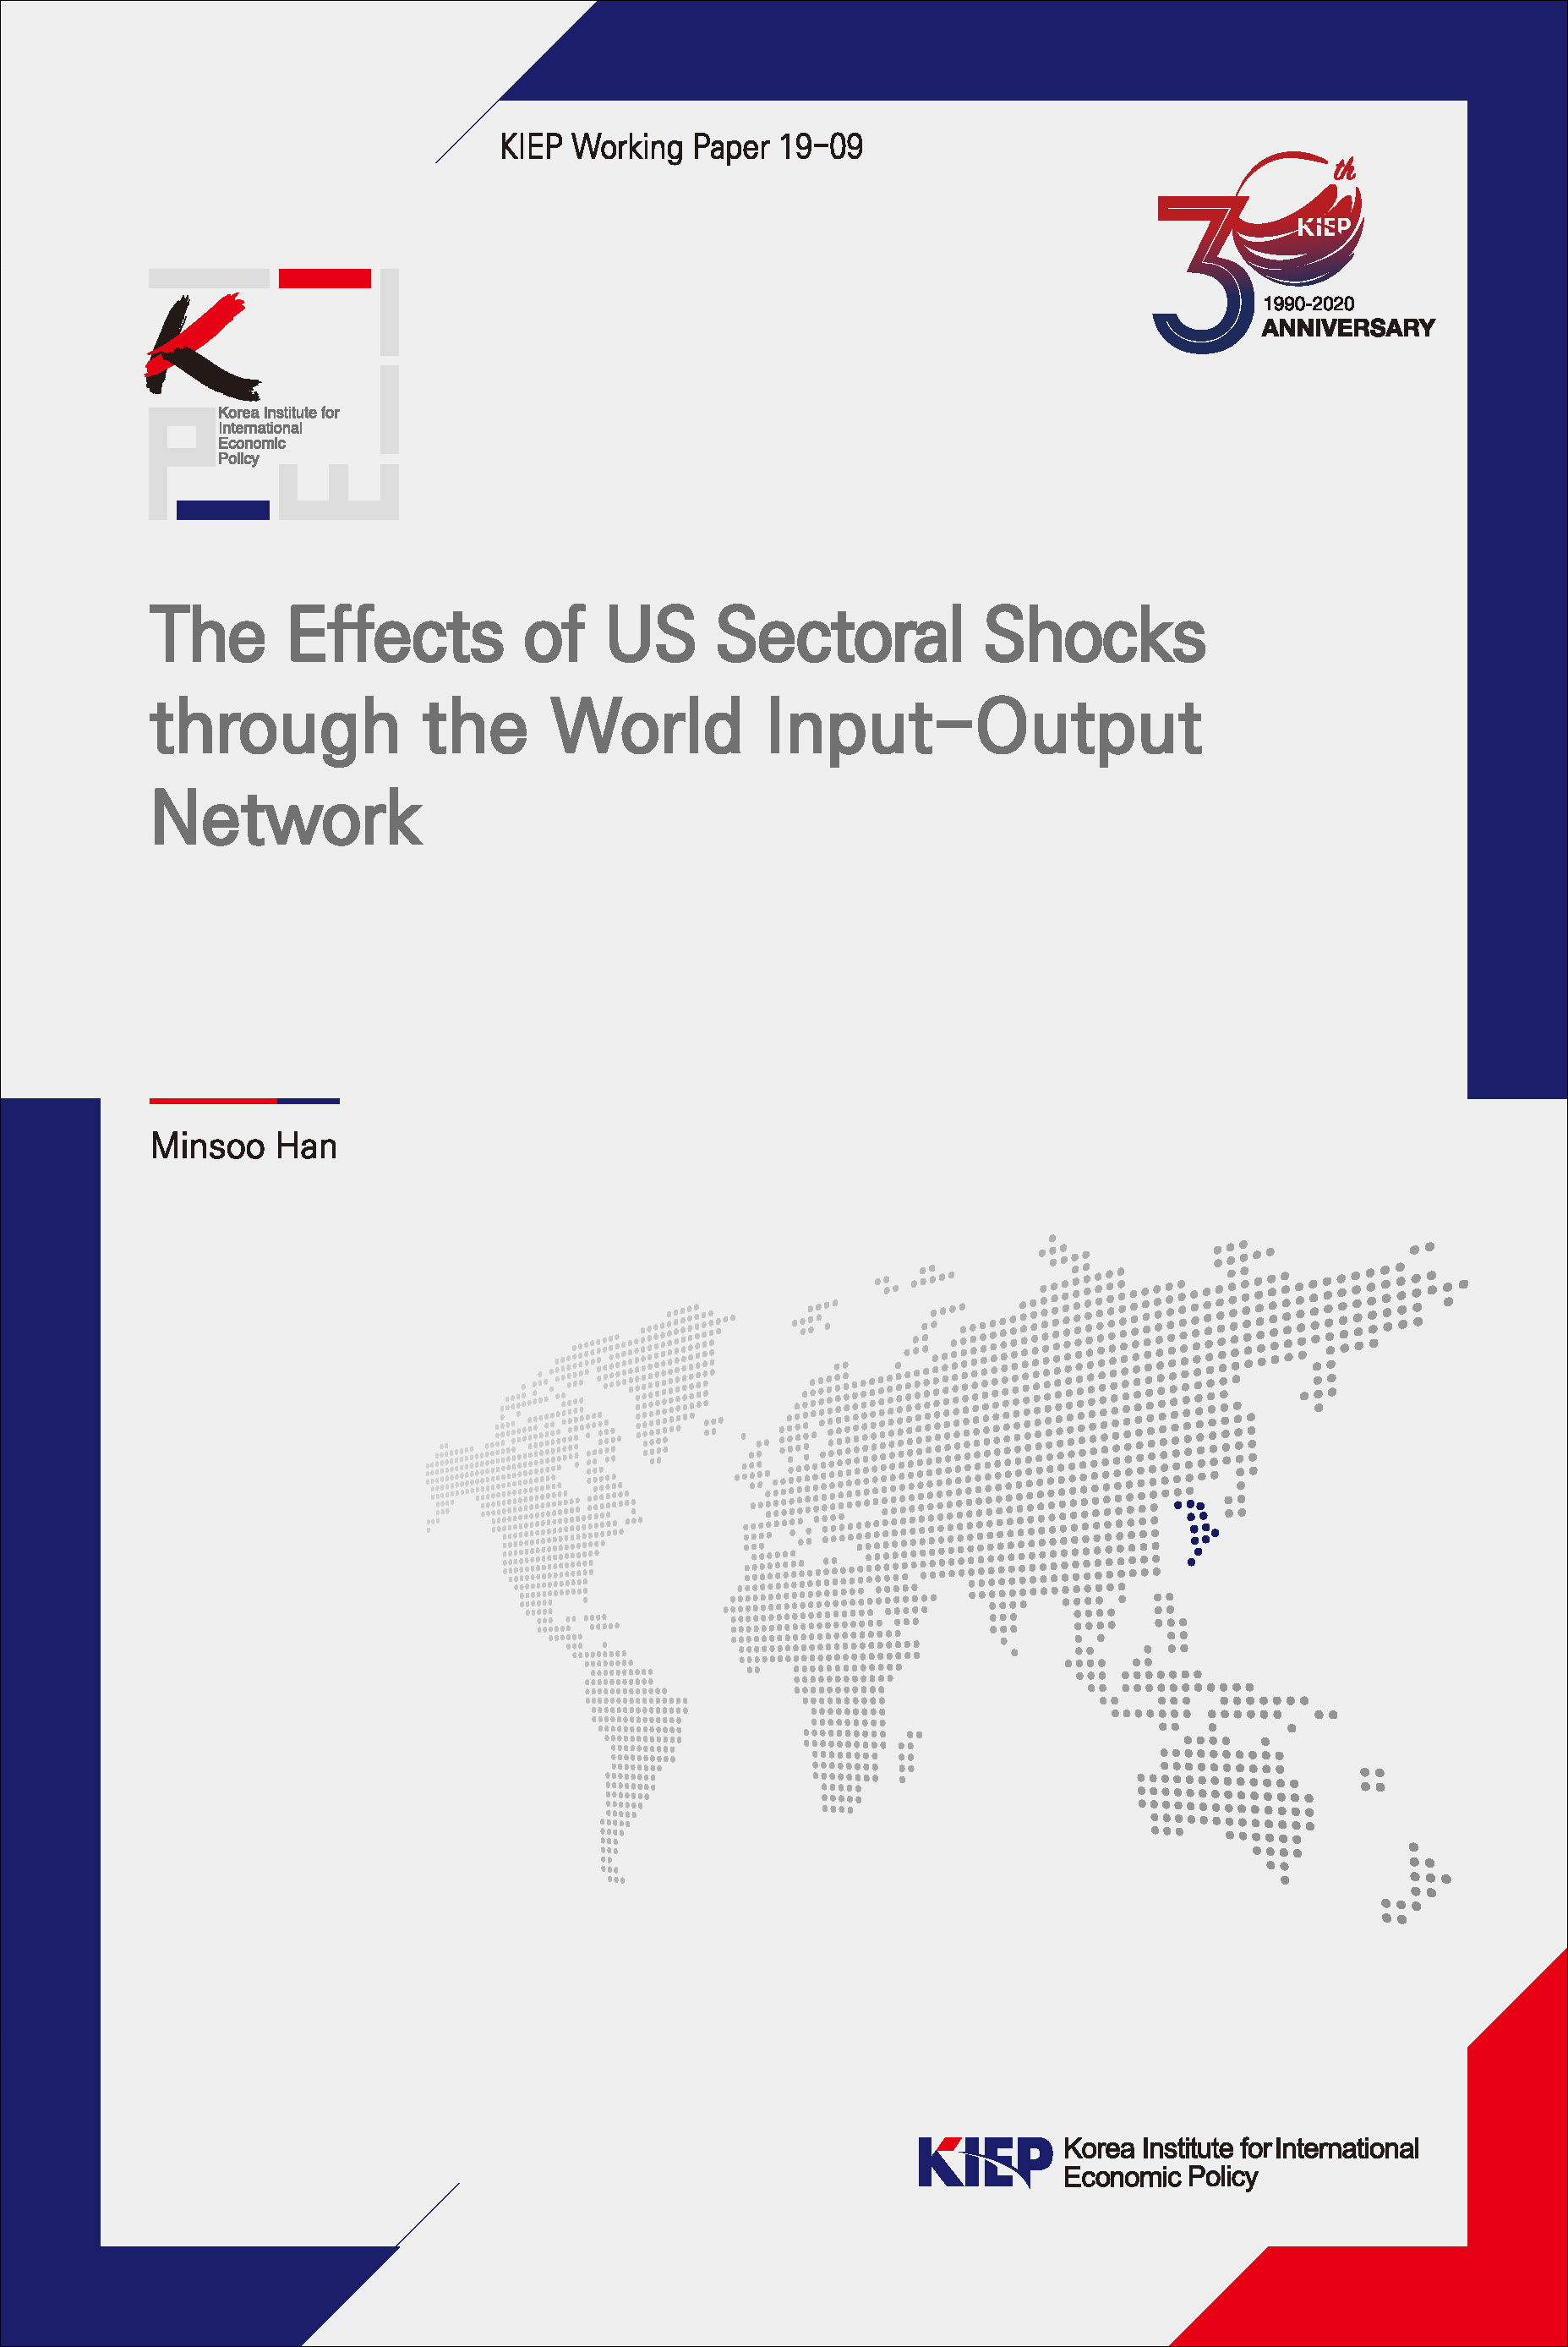 The Effects of US Sectoral Shocks through the World Input-Output Network